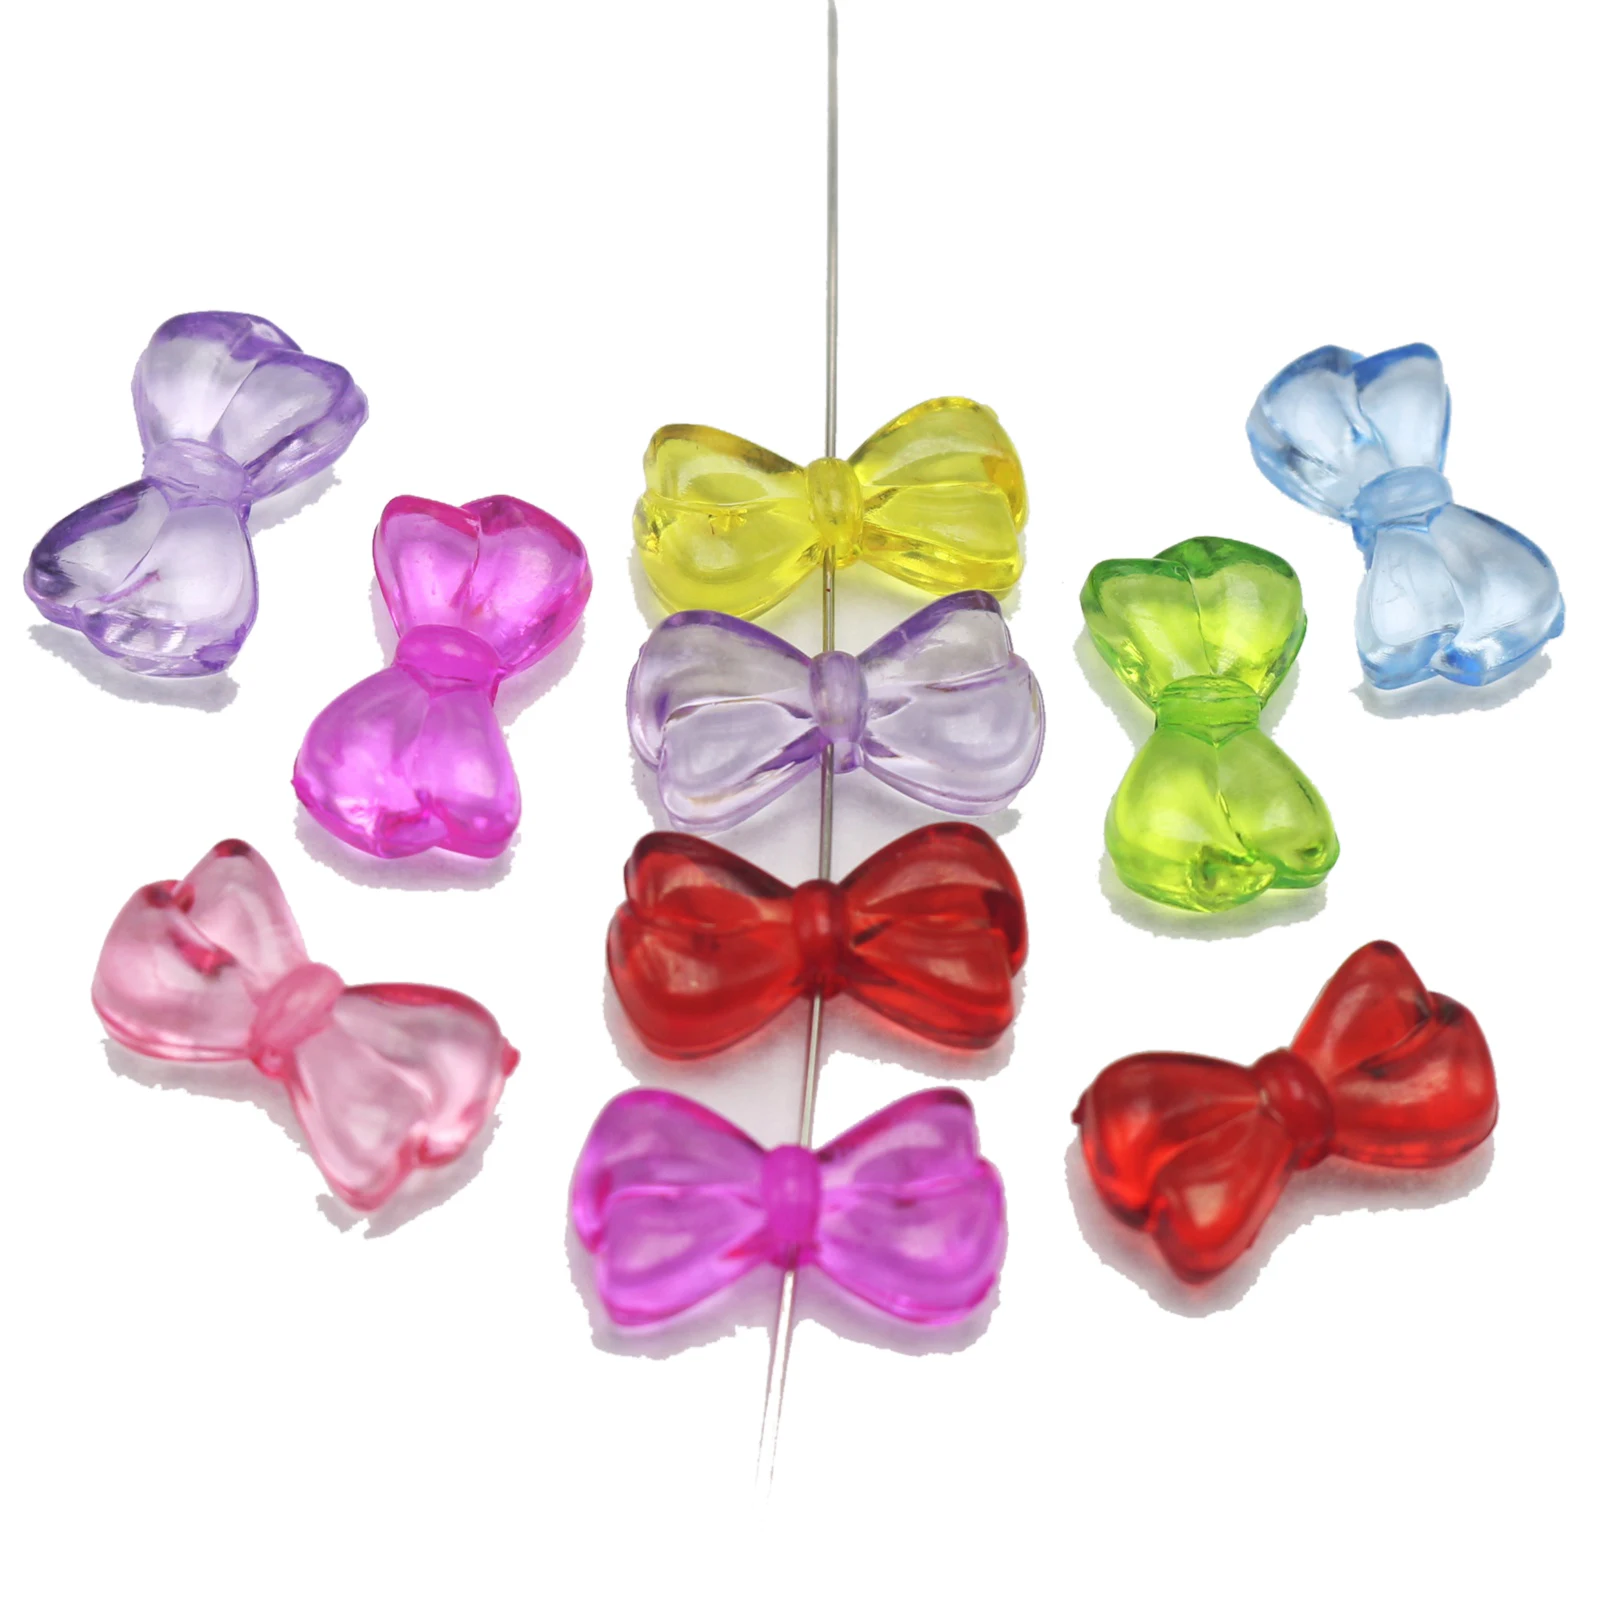 50 Mixed Color Transparent Acrylic Bowknot Bows Charm Beads 18mm DIY Earring